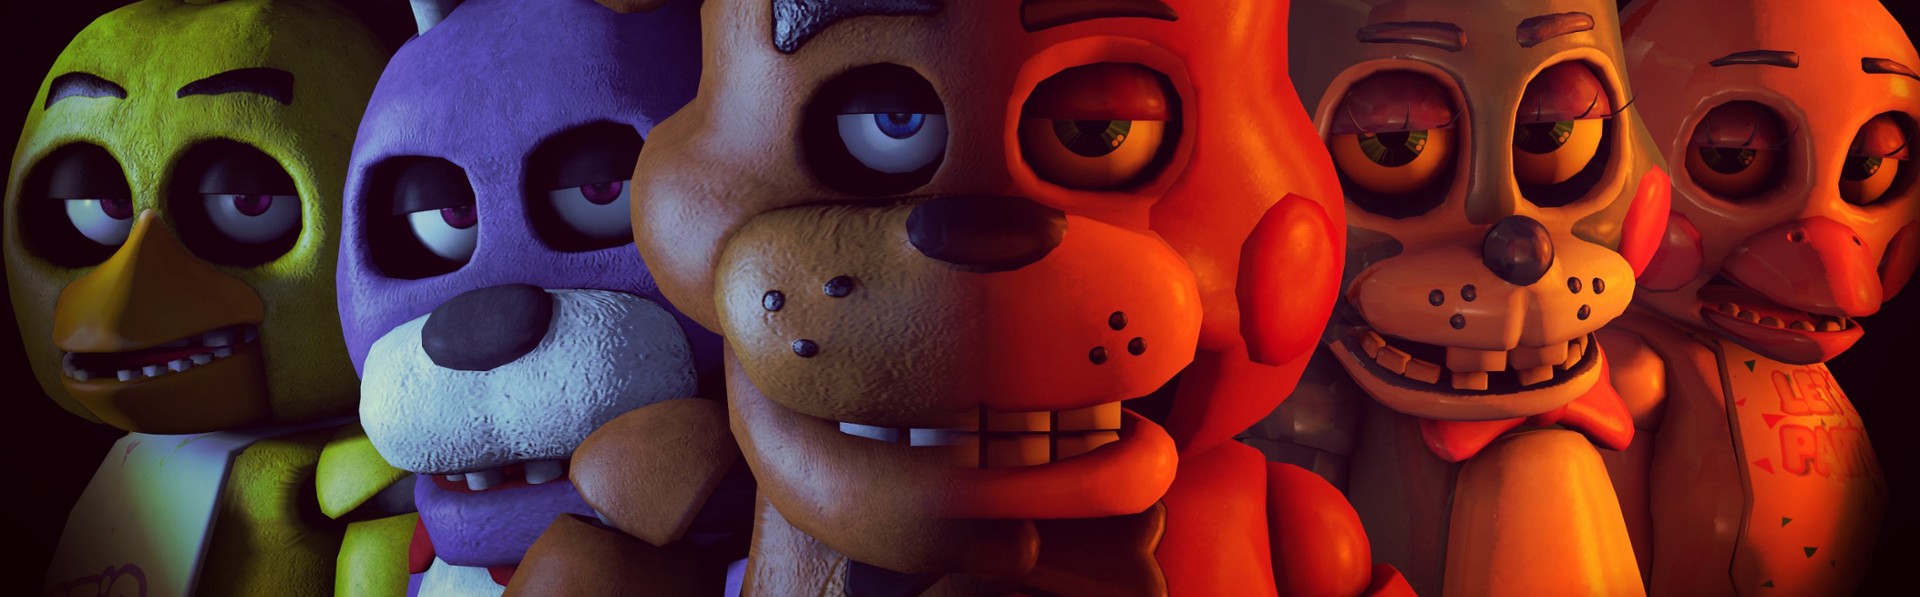 We know the approximate release date of the horror movie “Five Nights At Freddy’s 2.”